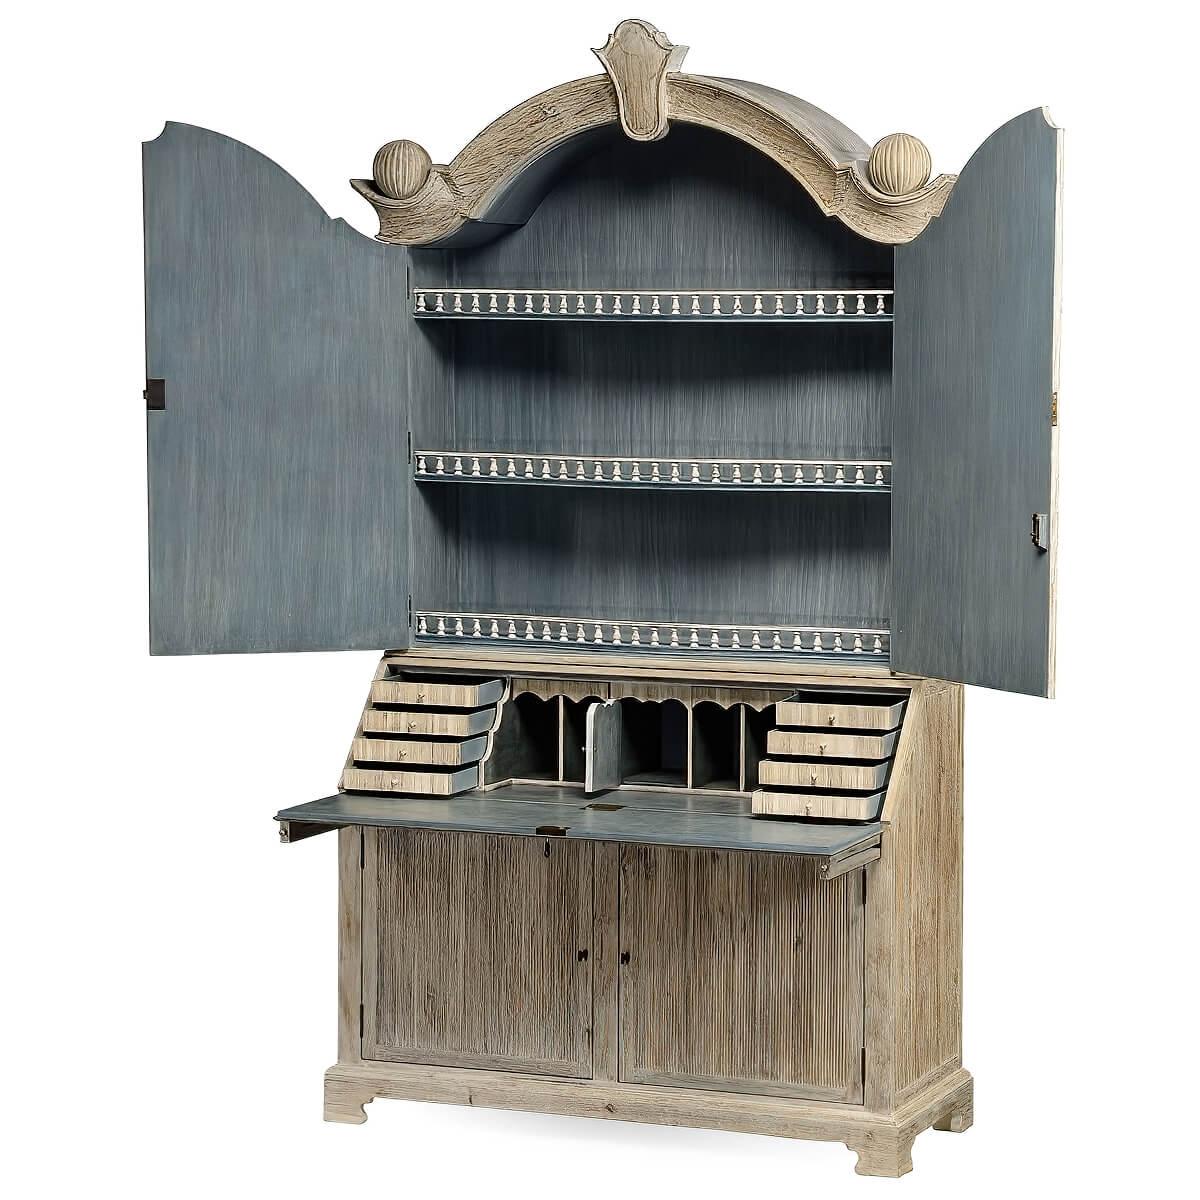 A wonderful designed modernized 18th century style secretary bookcase with a whitewashed exterior, with a carved cartouche mounted the center of the arched and molded crown with carved ball finials. The upper doors open to a three-shelf cabinet with